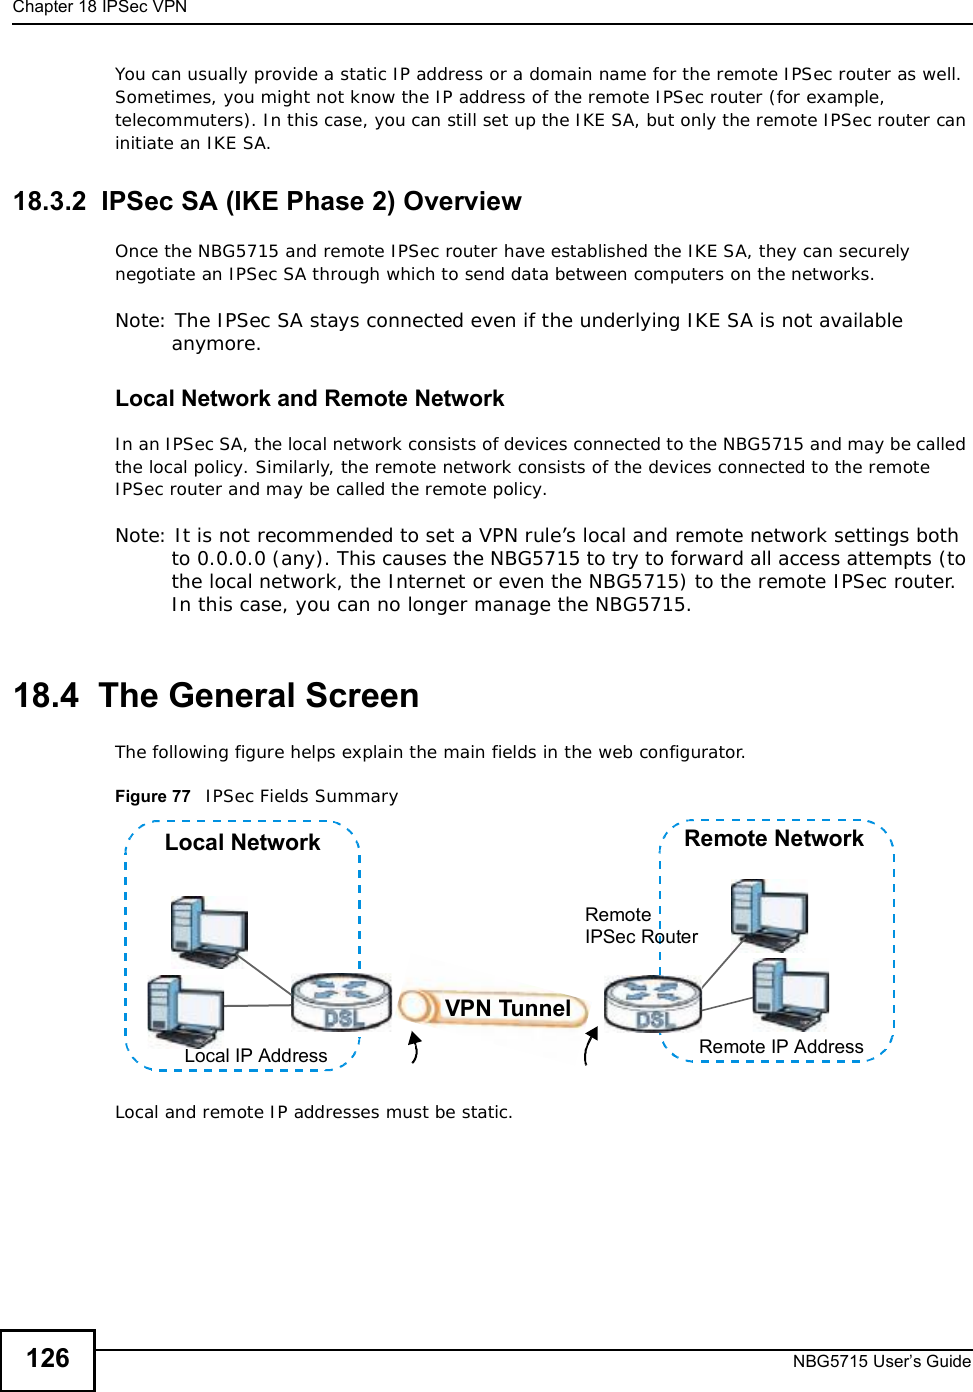 Chapter 18IPSec VPNNBG5715 User’s Guide126You can usually provide a static IP address or a domain name for the remote IPSec router as well. Sometimes, you might not know the IP address of the remote IPSec router (for example, telecommuters). In this case, you can still set up the IKE SA, but only the remote IPSec router can initiate an IKE SA.18.3.2  IPSec SA (IKE Phase 2) OverviewOnce the NBG5715 and remote IPSec router have established the IKE SA, they can securely negotiate an IPSec SA through which to send data between computers on the networks.Note: The IPSec SA stays connected even if the underlying IKE SA is not available anymore.Local Network and Remote NetworkIn an IPSec SA, the local network consists of devices connected to the NBG5715 and may be called the local policy. Similarly, the remote network consists of the devices connected to the remote IPSec router and may be called the remote policy.Note: It is not recommended to set a VPN rule’s local and remote network settings both to 0.0.0.0 (any). This causes the NBG5715 to try to forward all access attempts (to the local network, the Internet or even the NBG5715) to the remote IPSec router. In this case, you can no longer manage the NBG5715.18.4  The General ScreenThe following figure helps explain the main fields in the web configurator.Figure 77   IPSec Fields Summary  Local and remote IP addresses must be static.Local NetworkLocal IP AddressRemote NetworkRemote IP AddressRemoteIPSec RouterVPN Tunnel